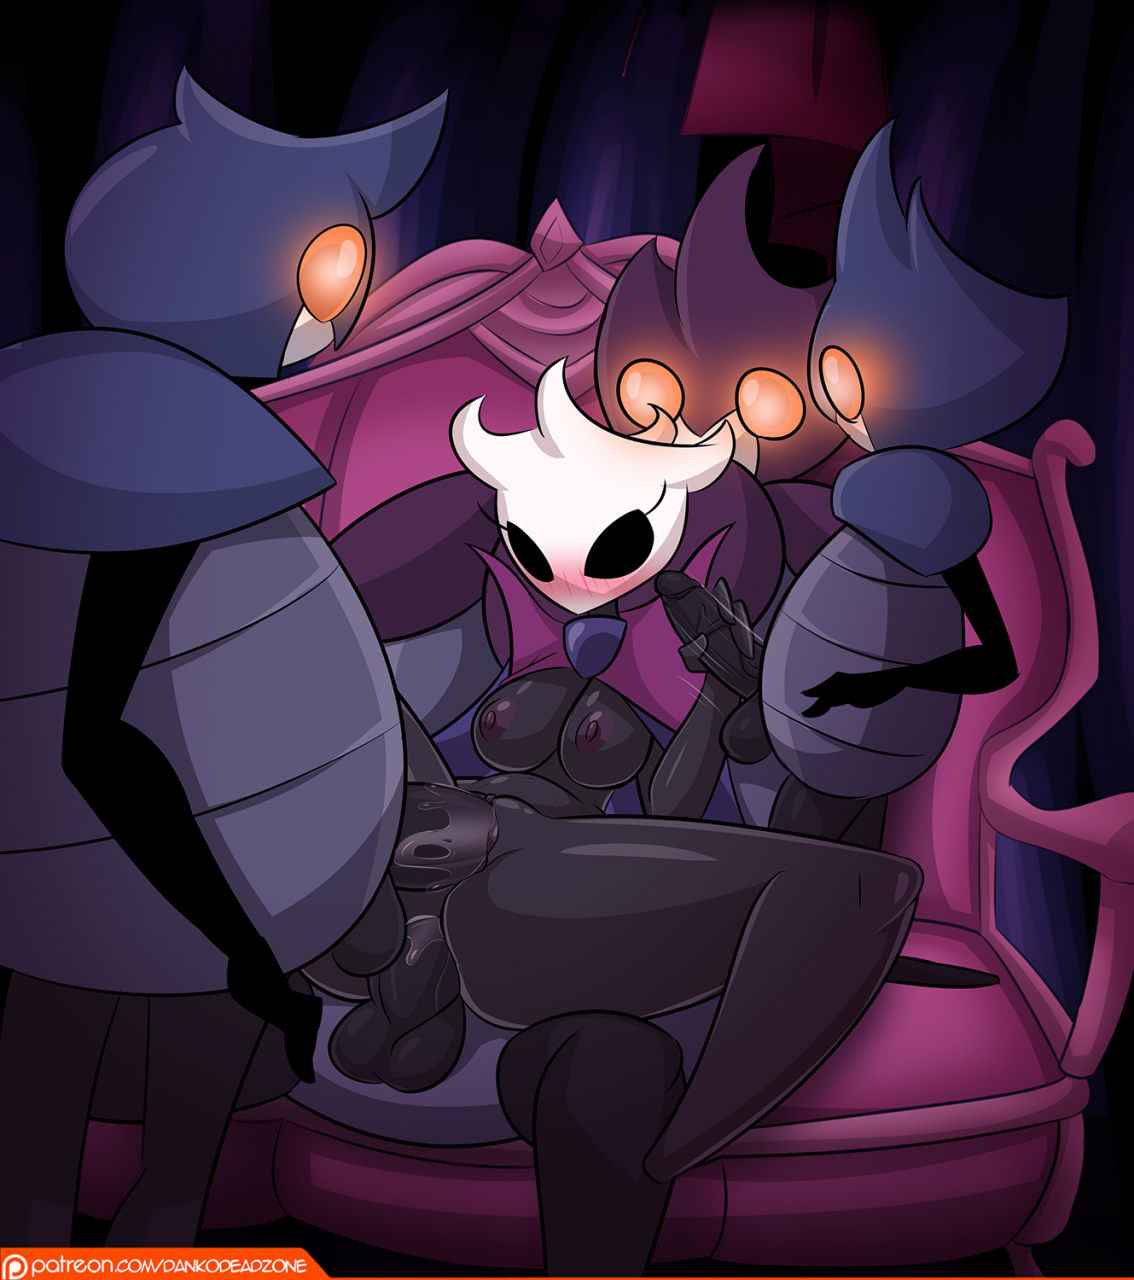 hollow-knight-commission.